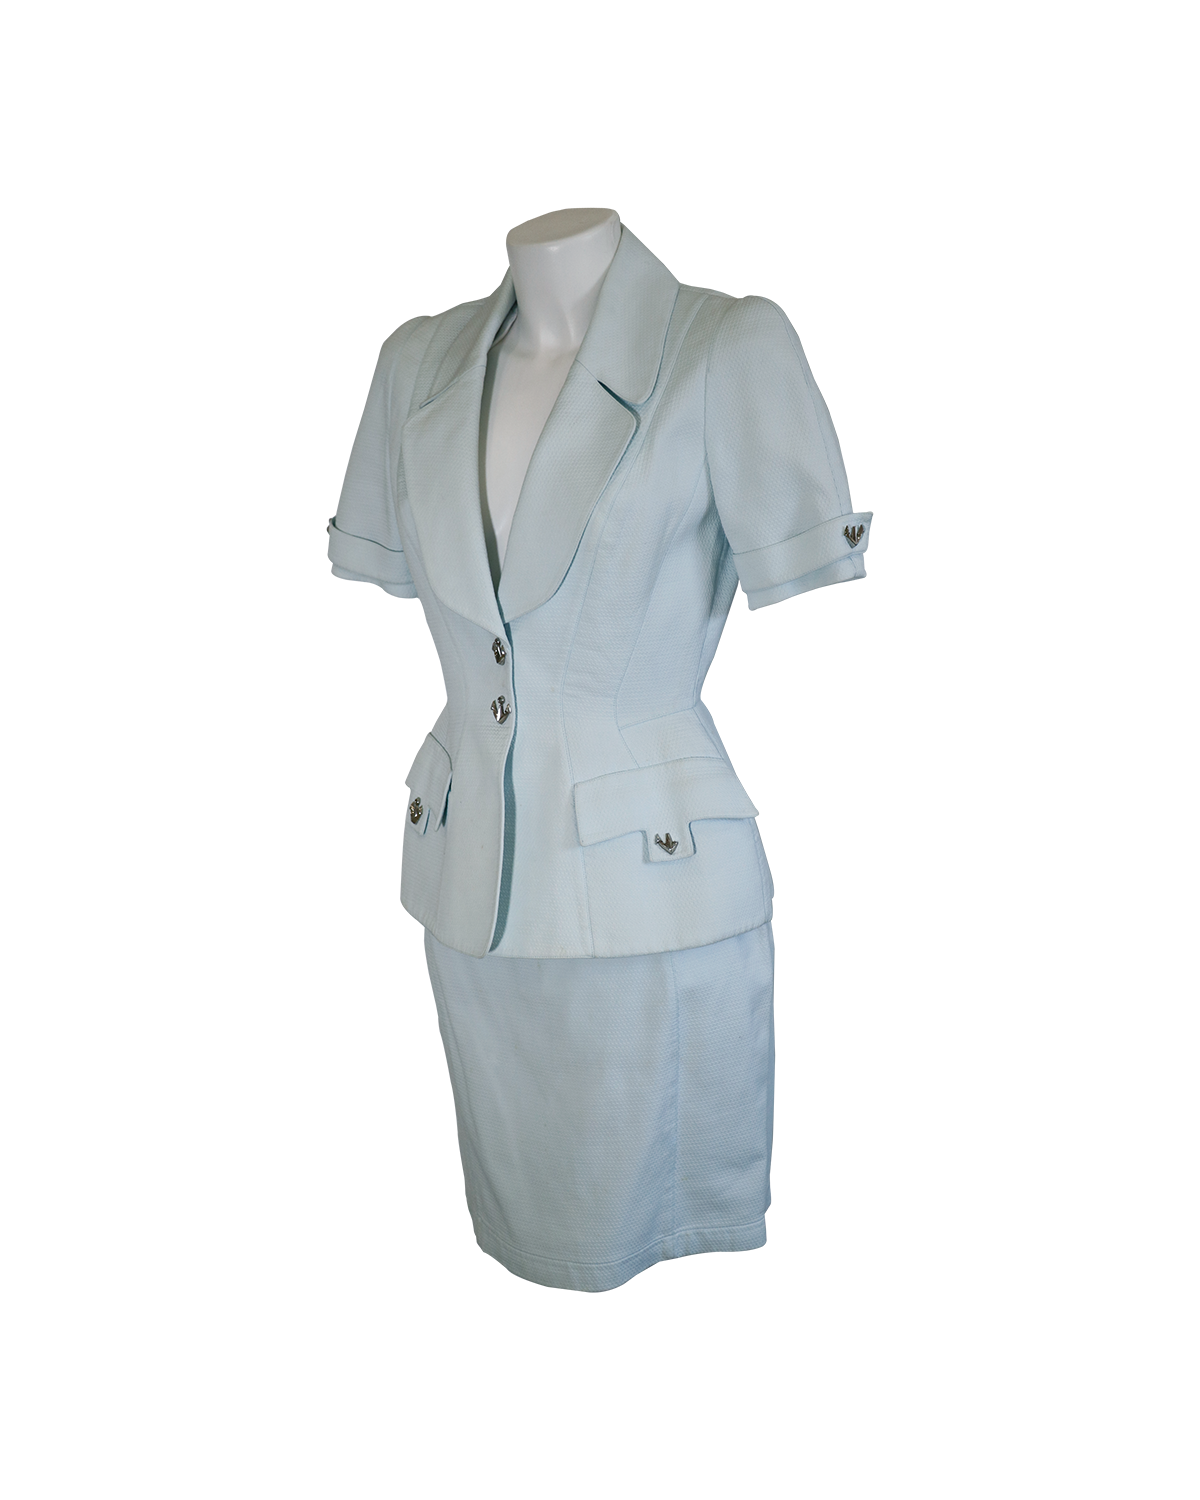 Thierry Mugler Light Blue Suit from 1980s